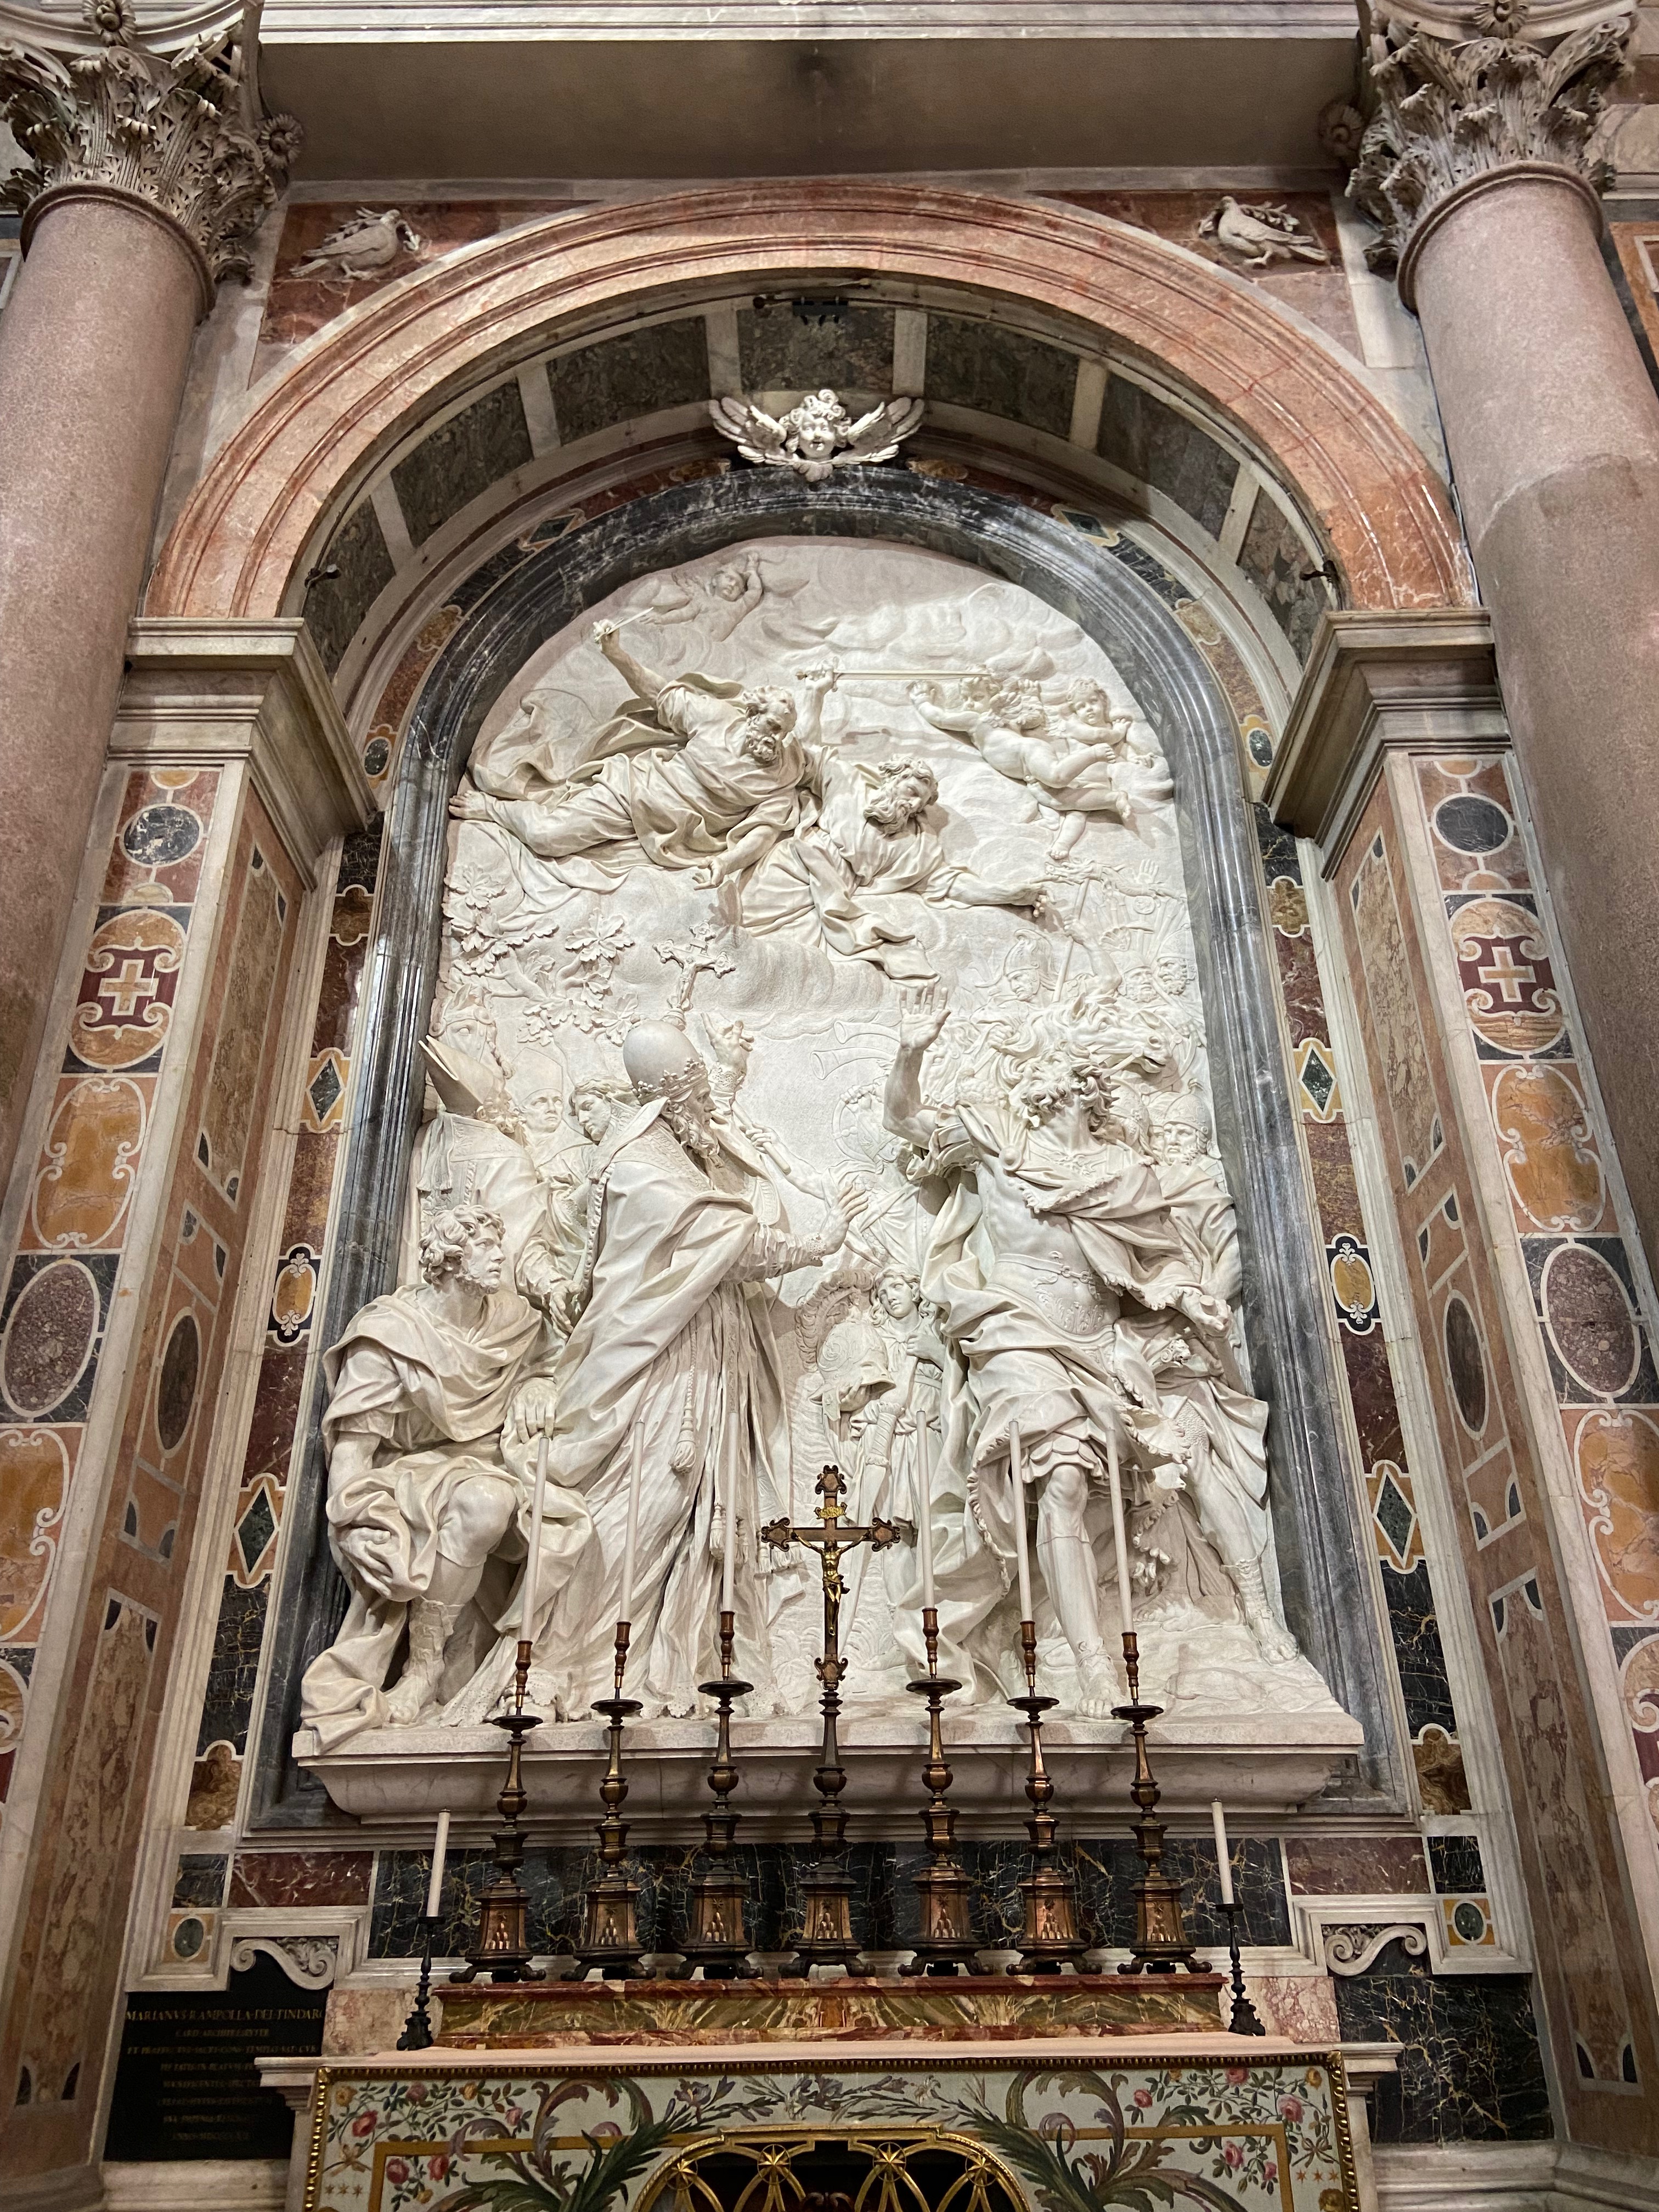 A stone carving inside St. Peter's Basilica.